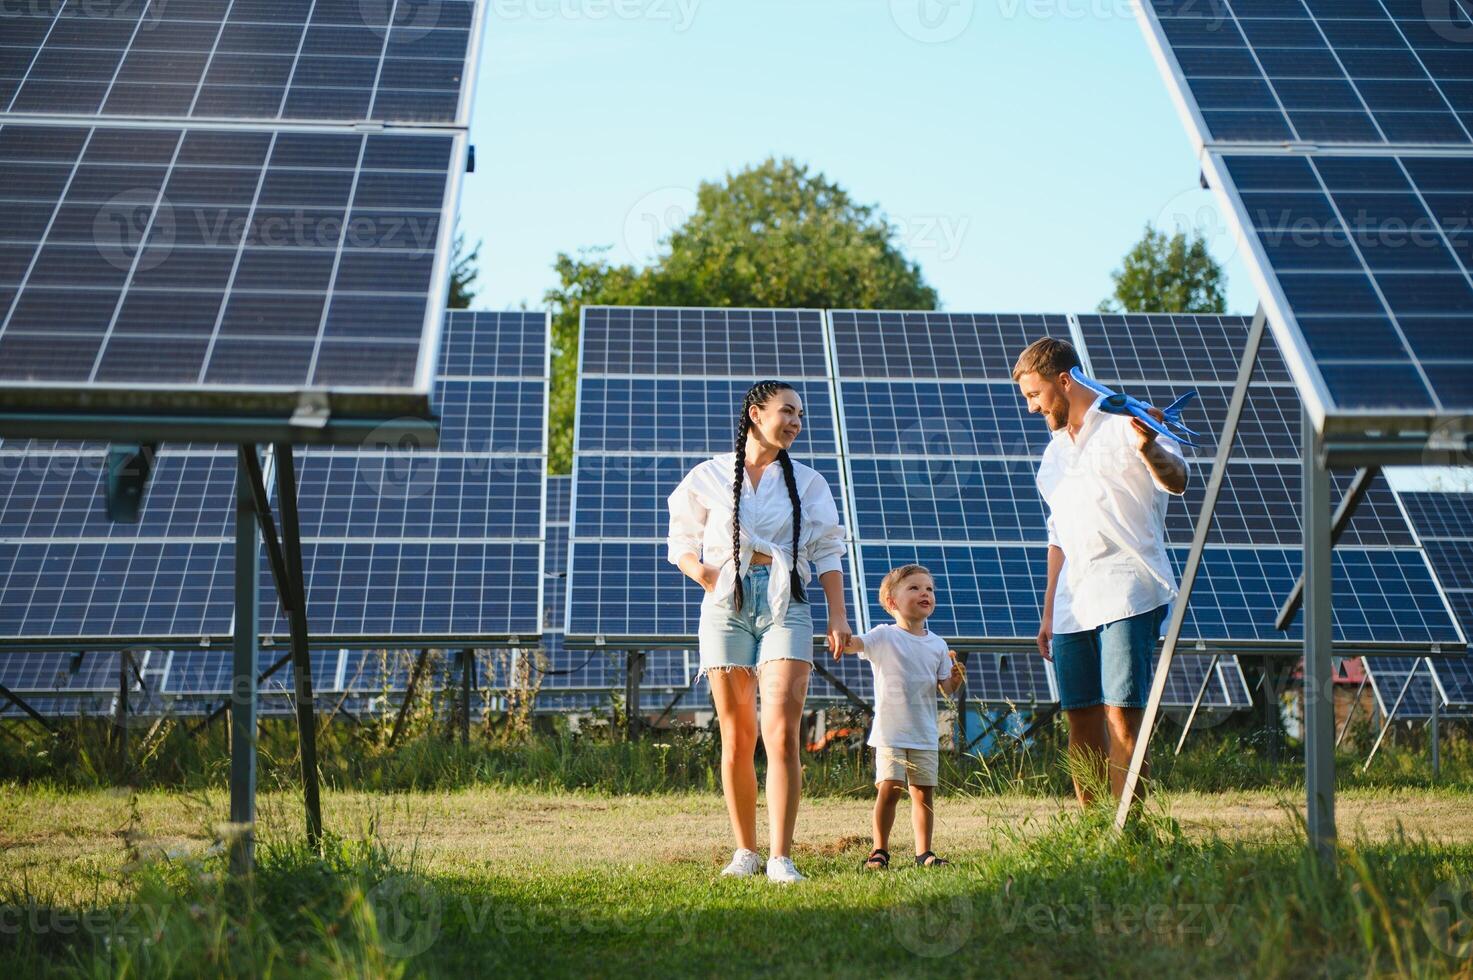 Enthusiastic father showing potential of alternative energy. Contemporary family looking at new solar station they bought. Side view of happy parents and interested child next to solar panels photo